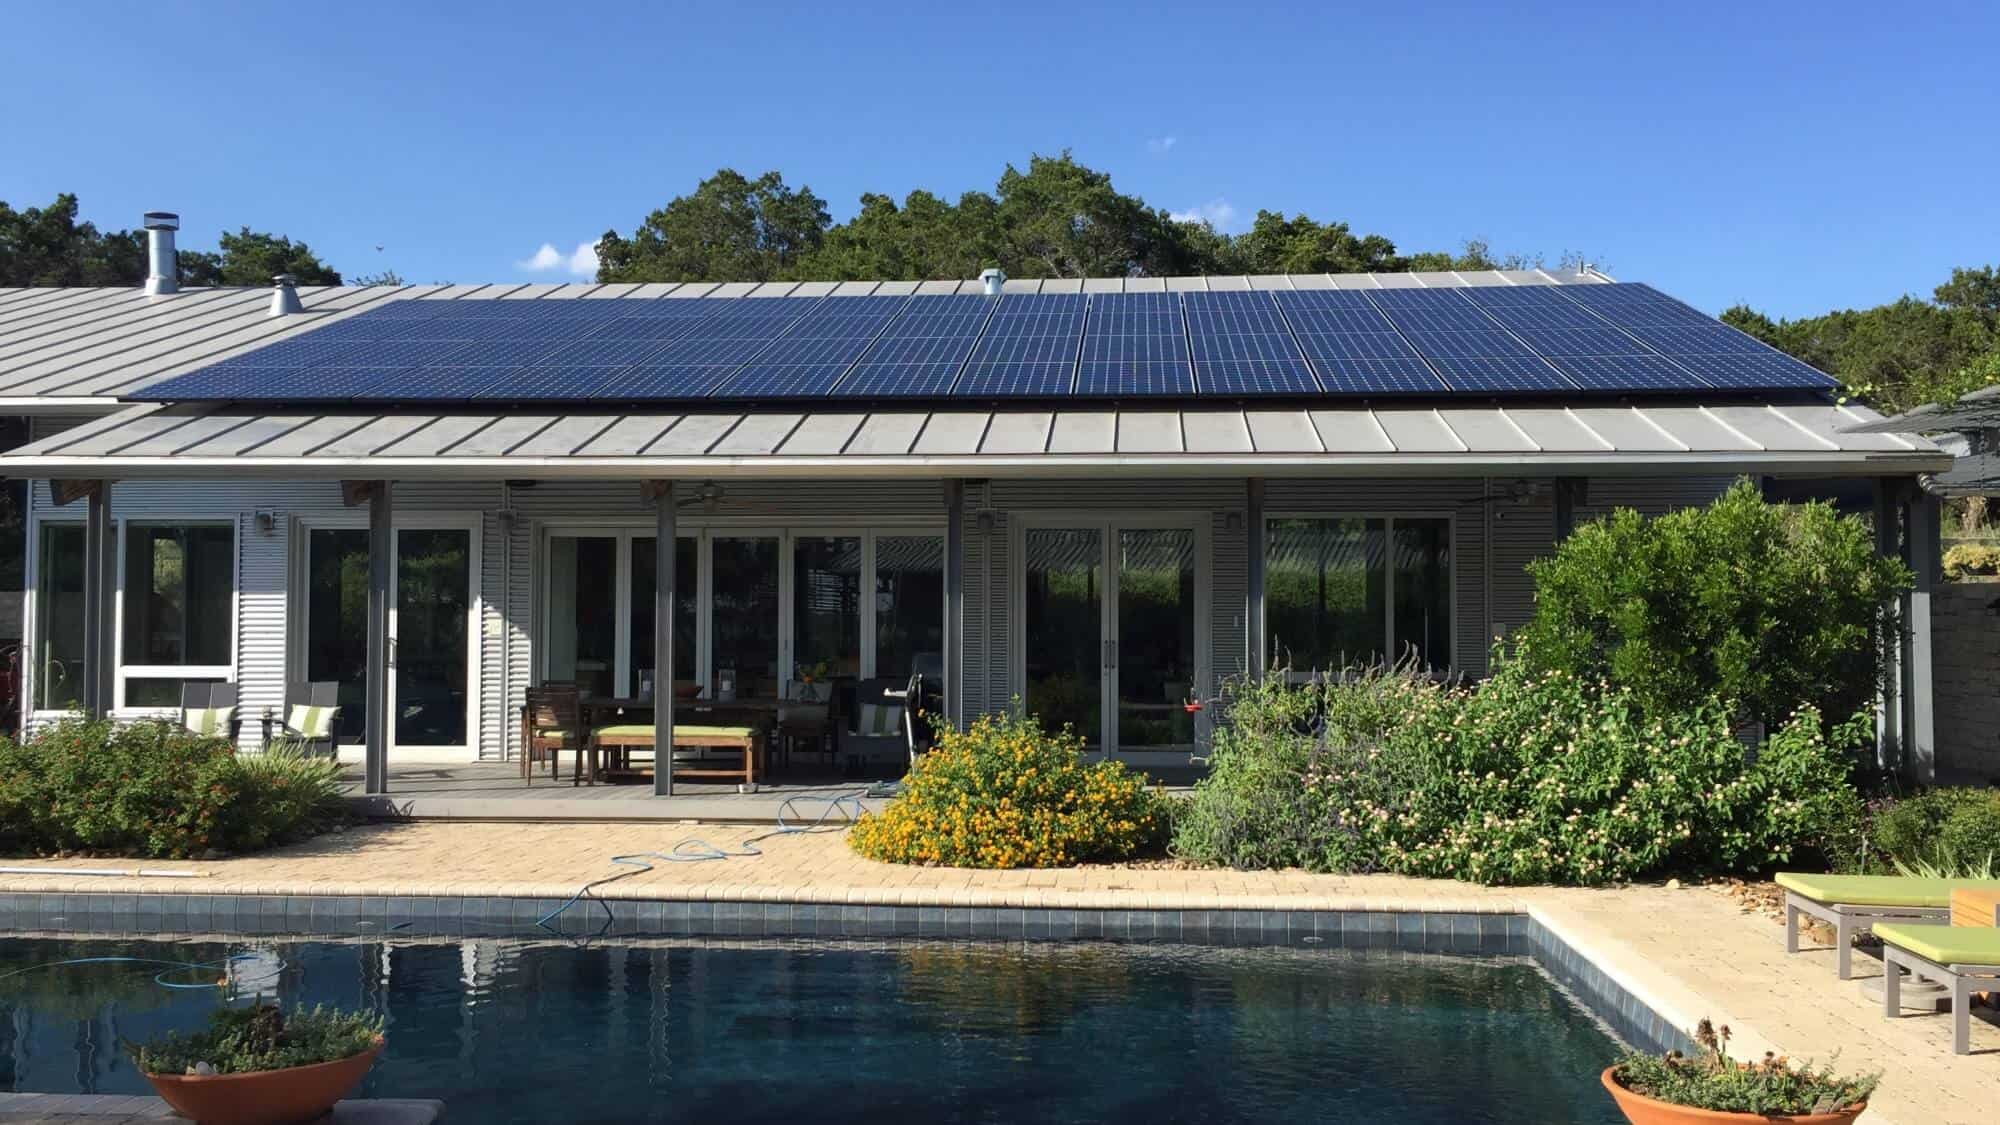 Houston house with solar panels installed on the roof and backyard view